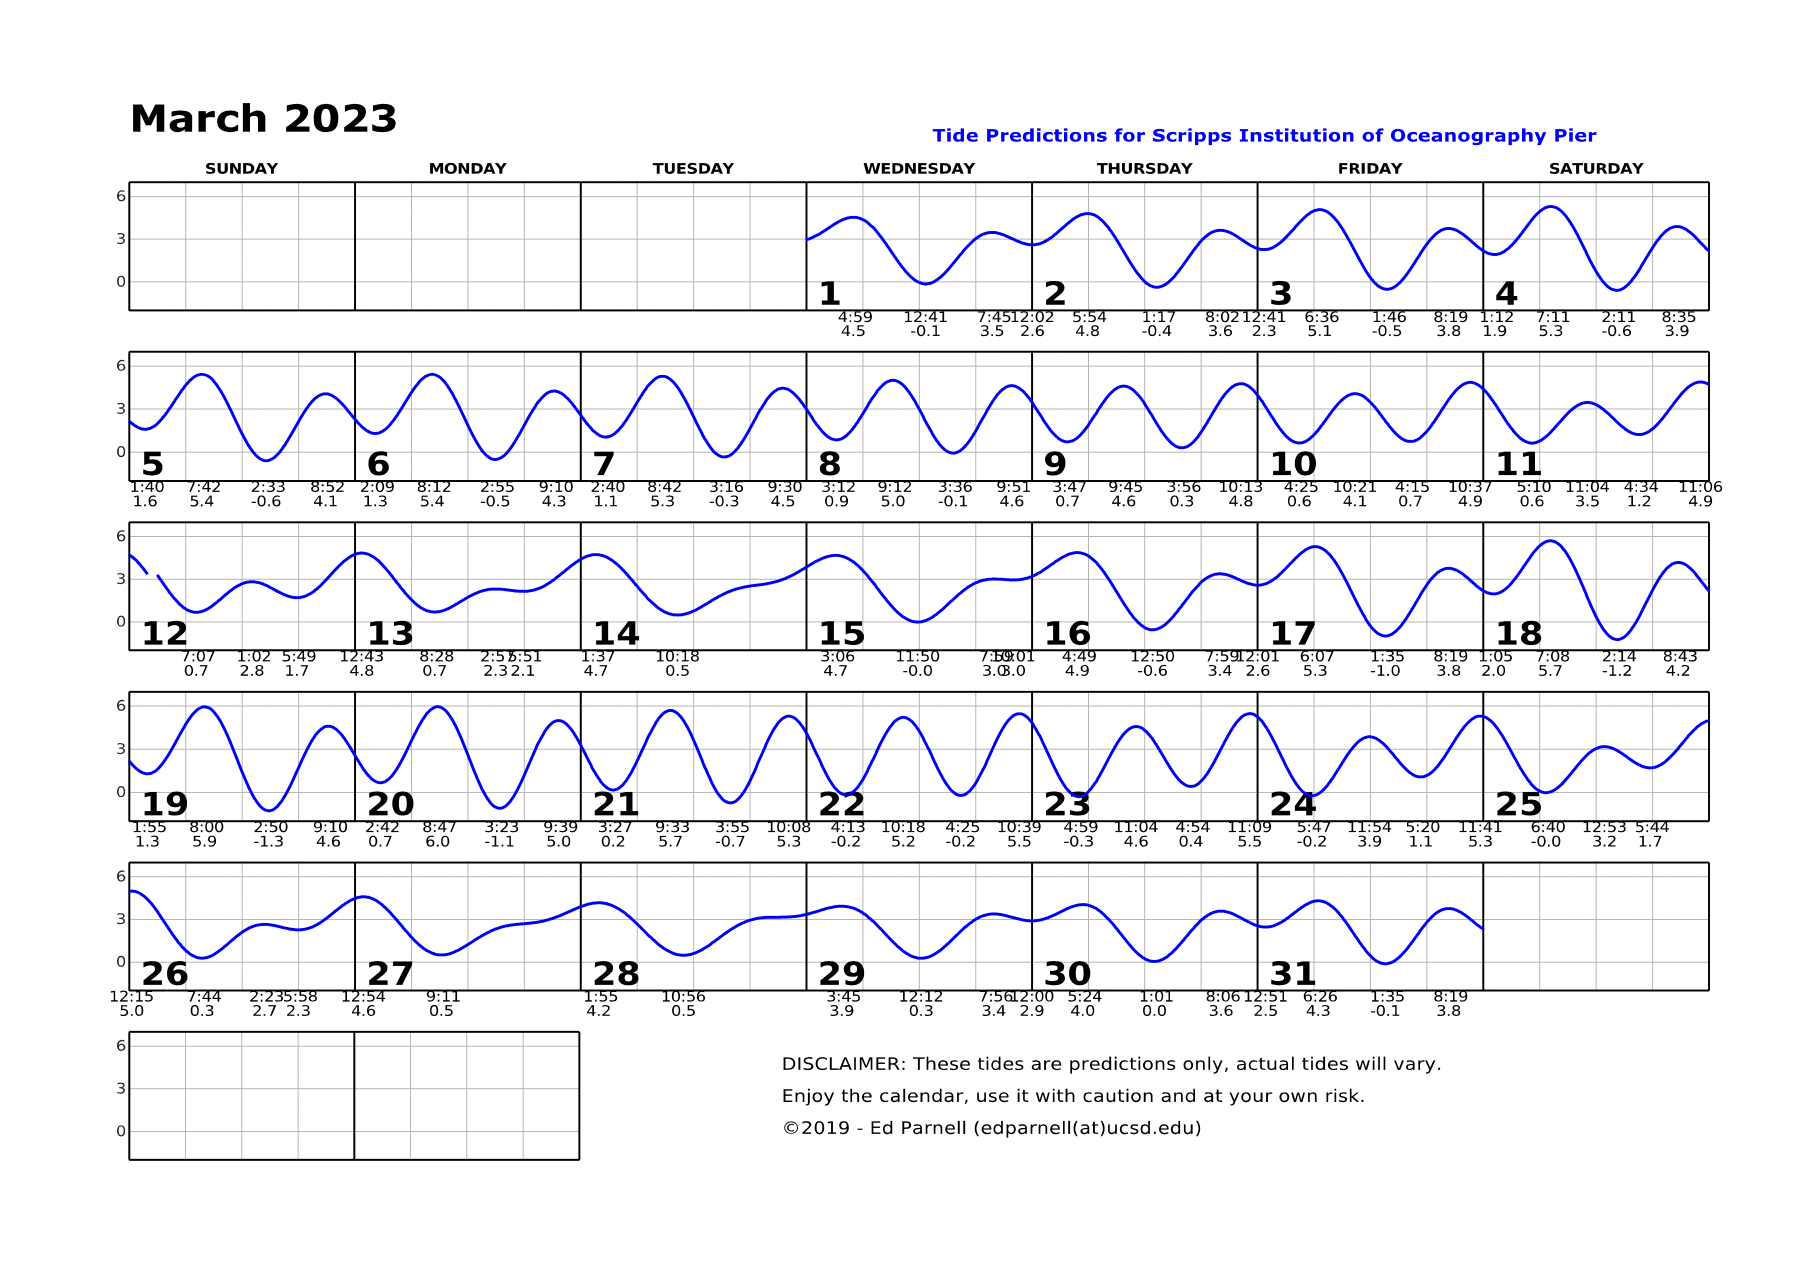 2023 calendar with single squiggly horizontal line through squares indicates high and low tides. Everyday the line goes down twice and up twice. Contact edparnell@ucsd.edu for more details about the calendar.